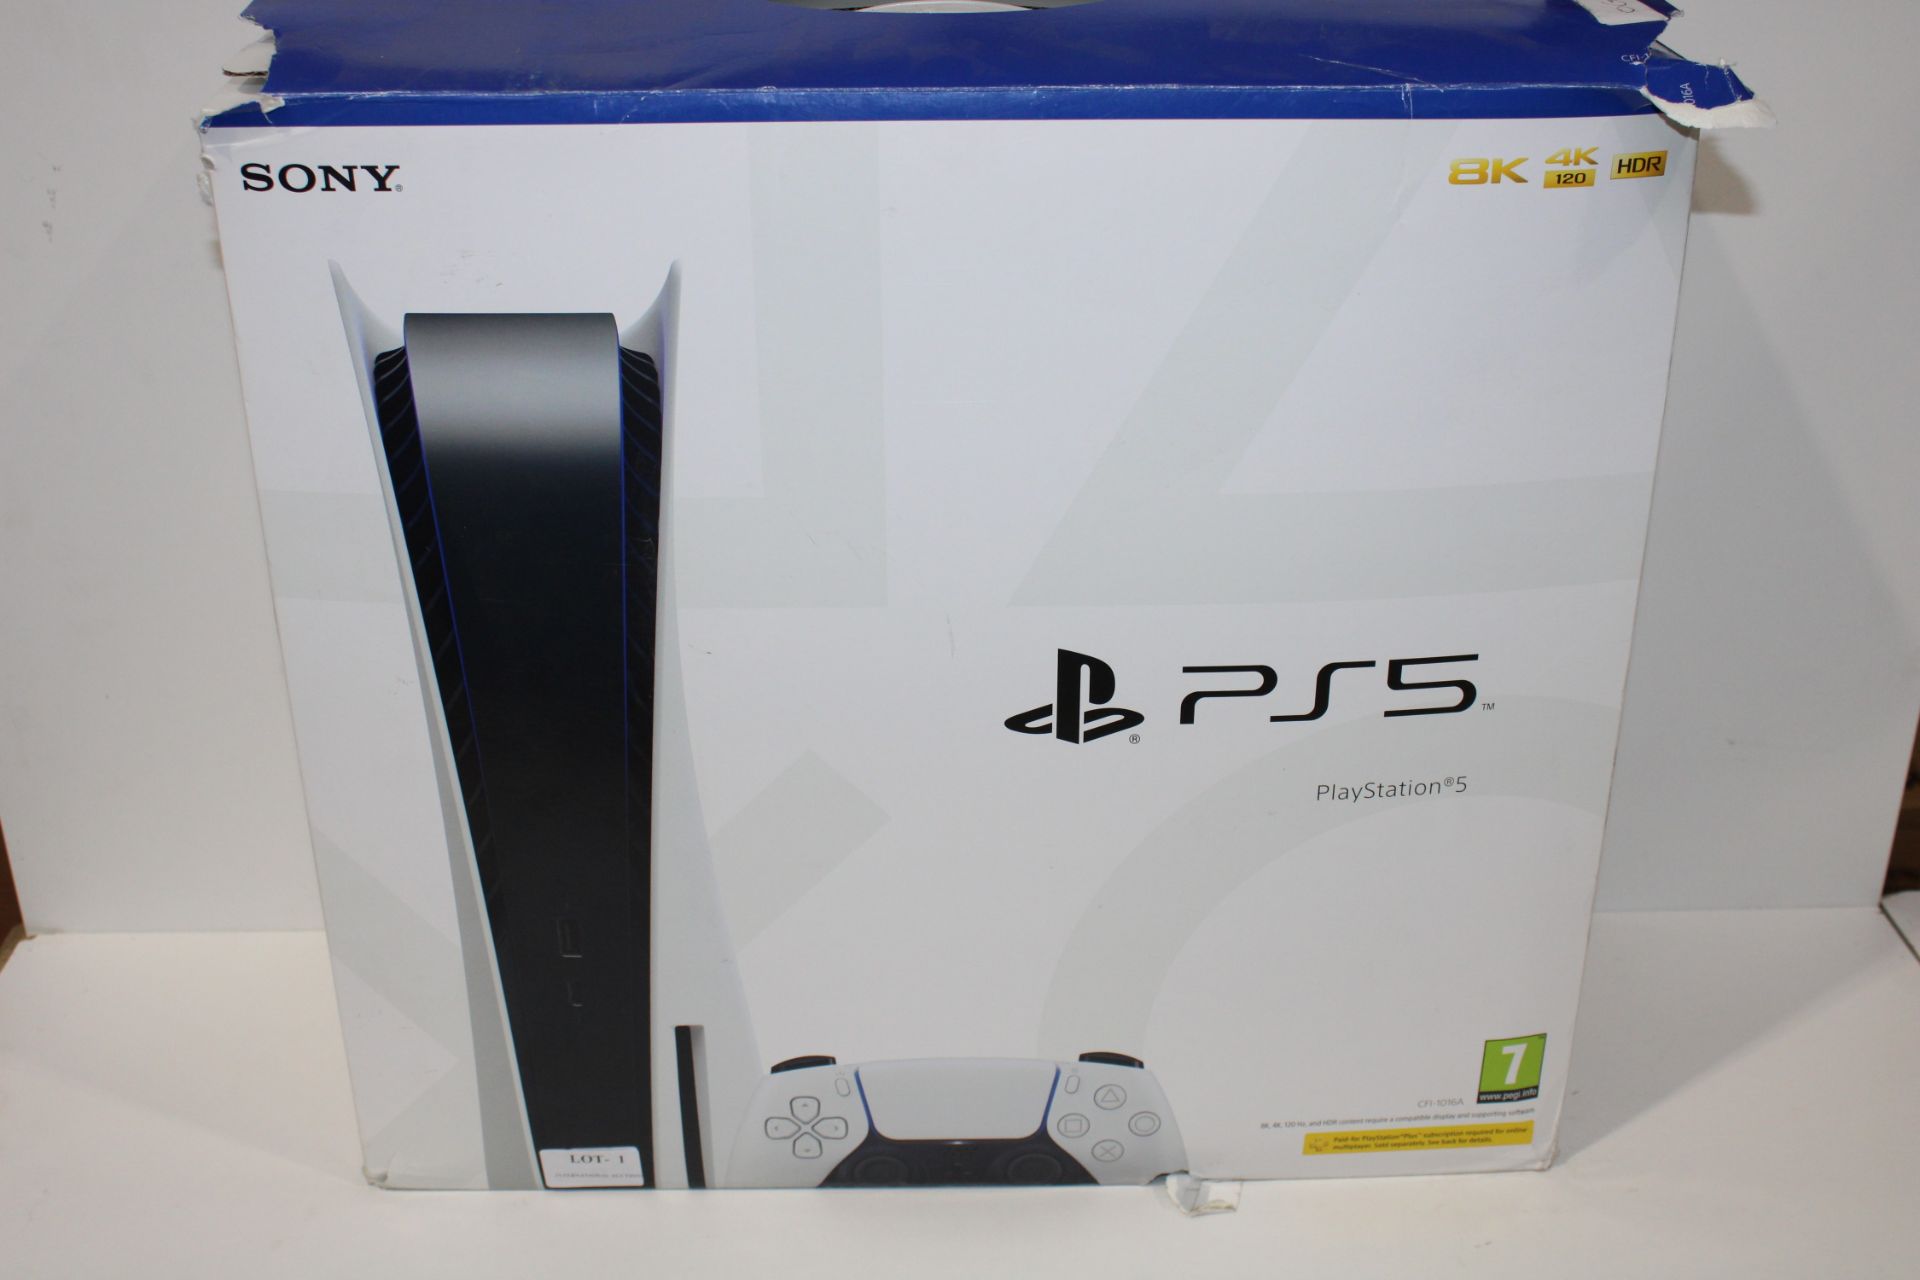 BOXED SONY PLAYSTATION 5 PS5 8K 4K 120 HDR MODEL: CFI-1016A RRP £709.00Condition ReportAppraisal